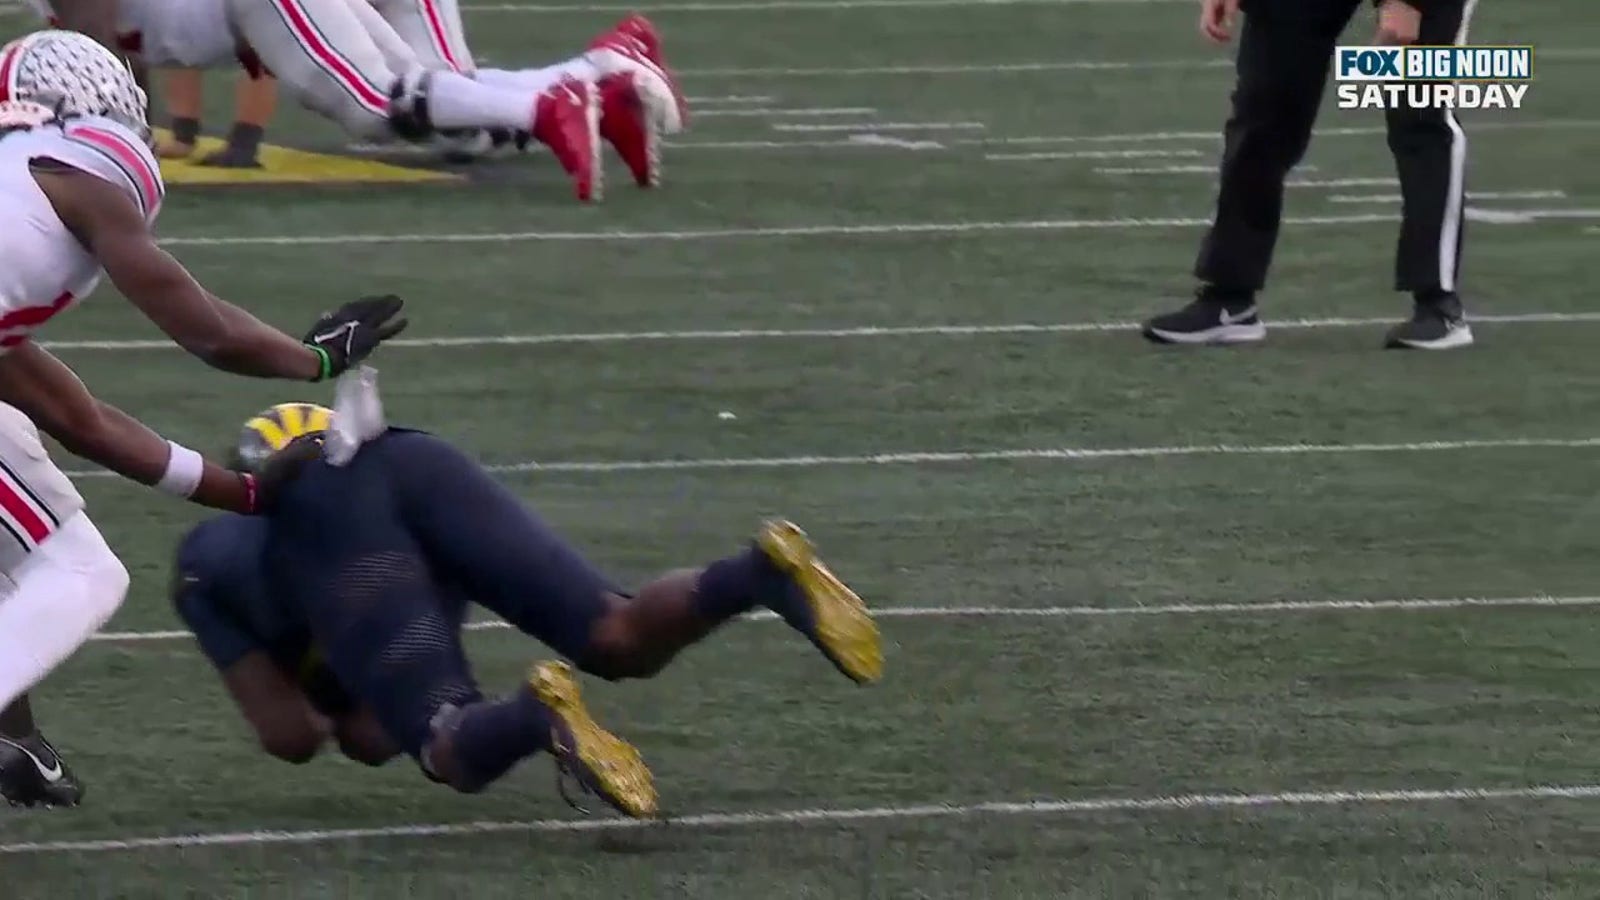 Rod Moore picks off Ohio State’s Kyle McCord, sealing Michigan’s third straight victory in The Game